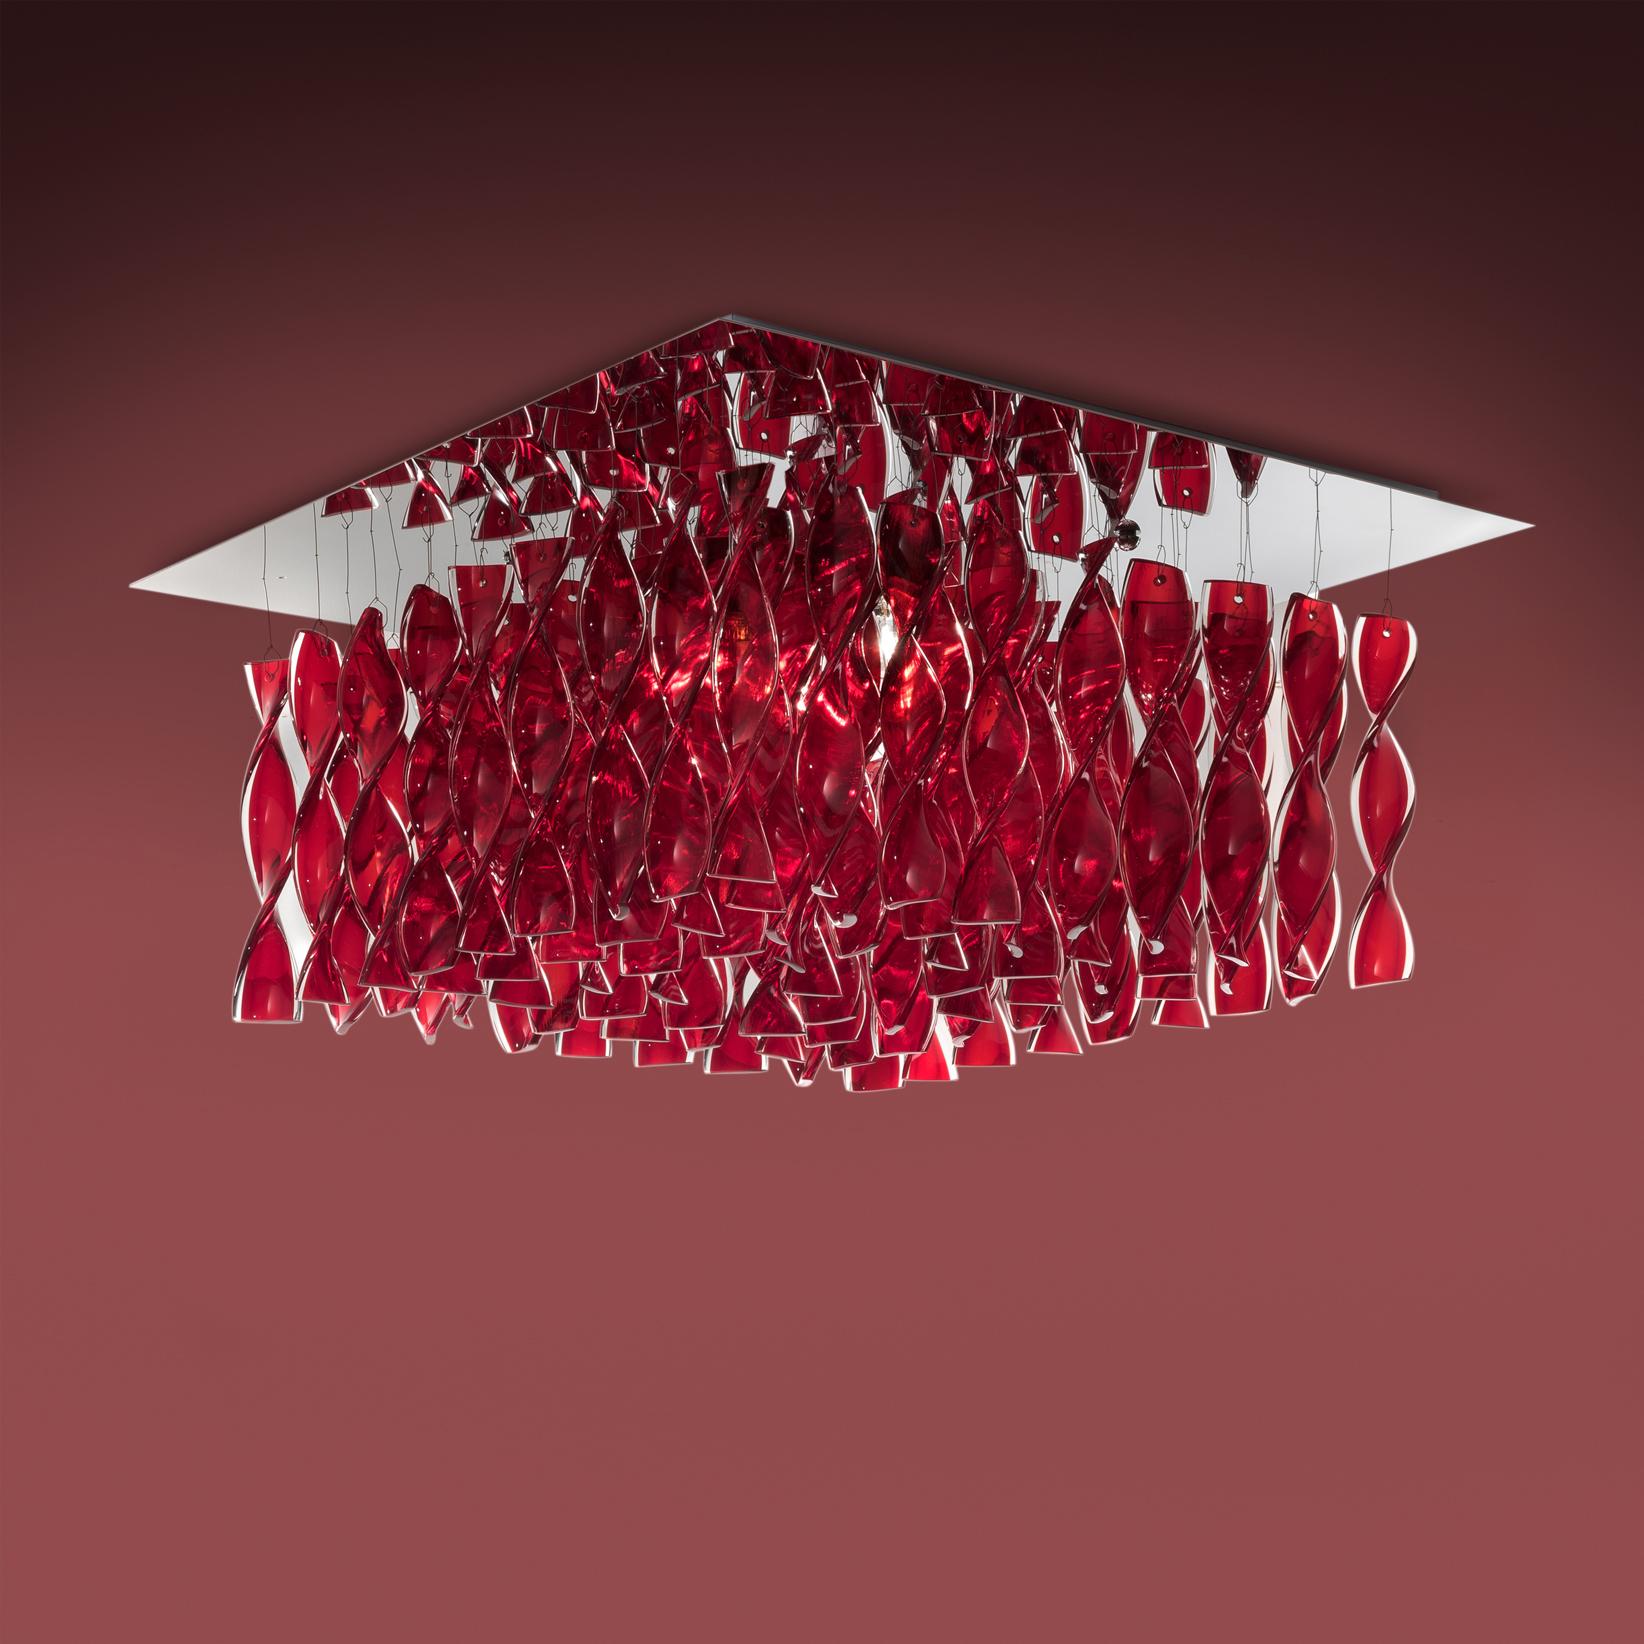 Axolight Avir Medium Ceiling Lamp in Chrome Steel Canopy and Red by Manuel & Vanessa Vivian

Waves of light, dynamic reflections, uniqueness. The knowledge and craftsmanship of a master glassmaker express themselves in the shape of small glasses